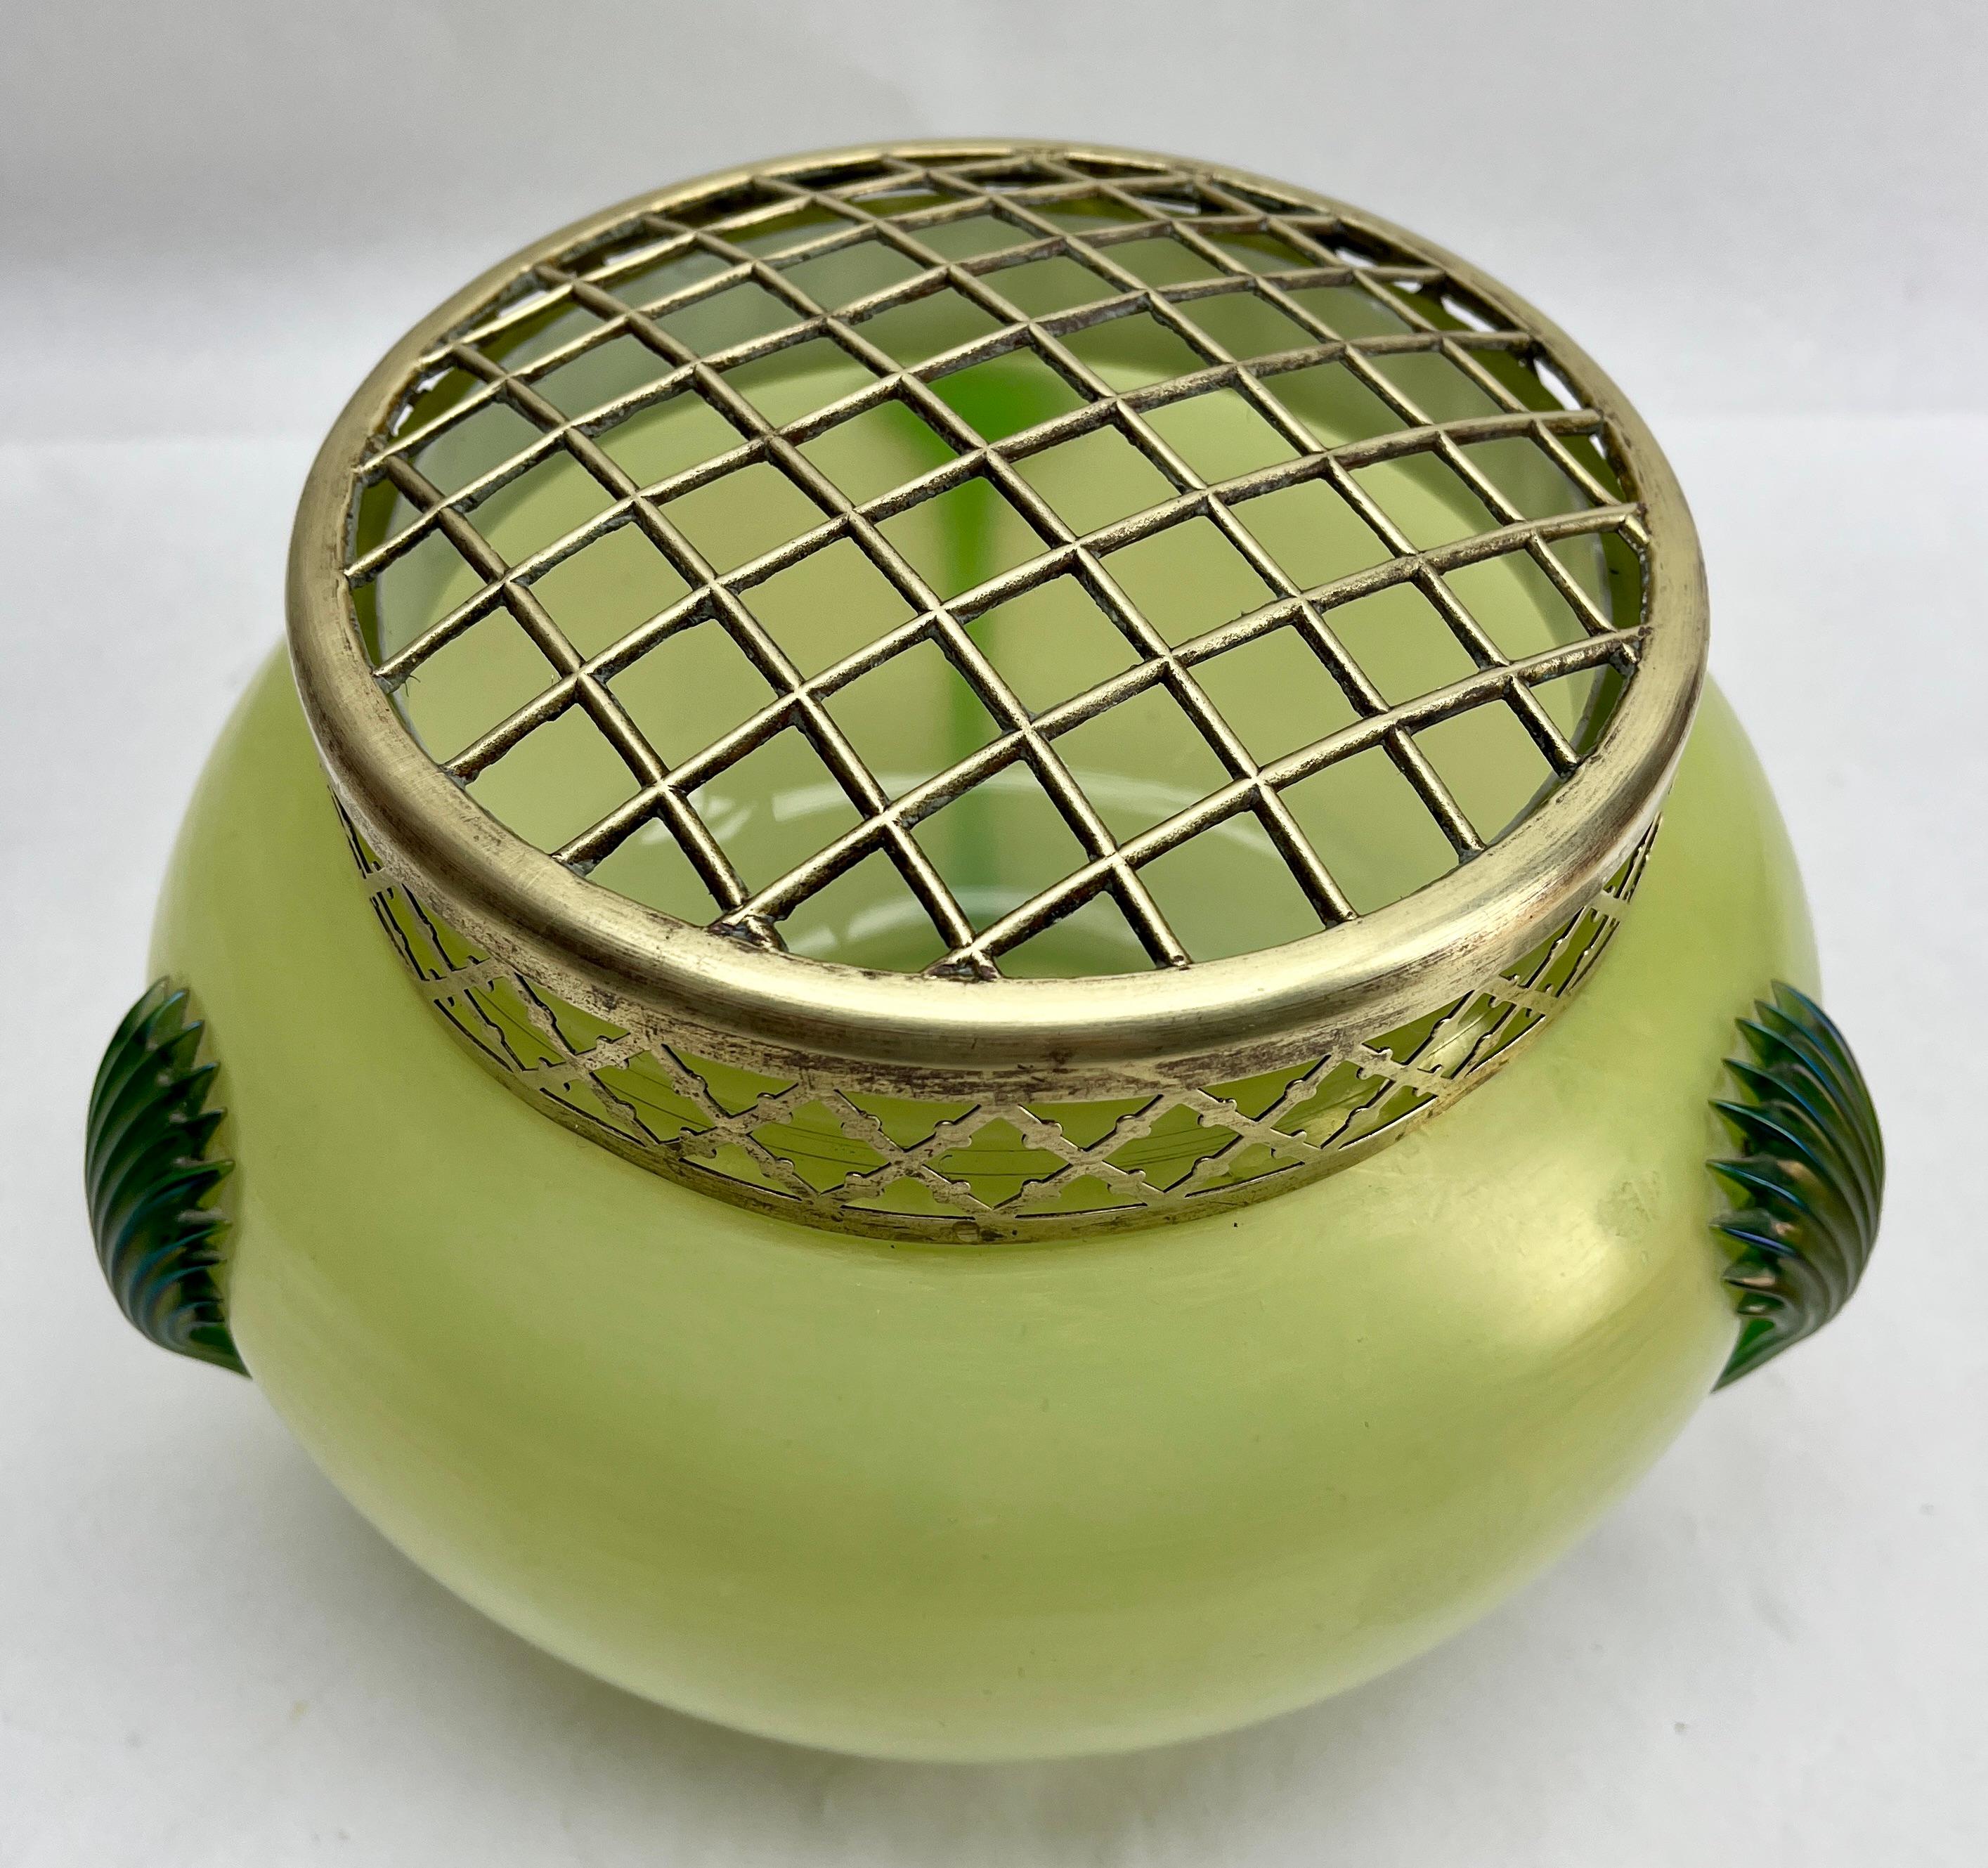 Art Nouveau Large Green iridescent glass Pique Fleurs' vase by Loetz' with Grille

Subtle, hand blown glass vase in the Art Deco style. This design for vases is often called 'Pique fleurs' or 'rose-bowl' and is supplied with a fitted metal grille to